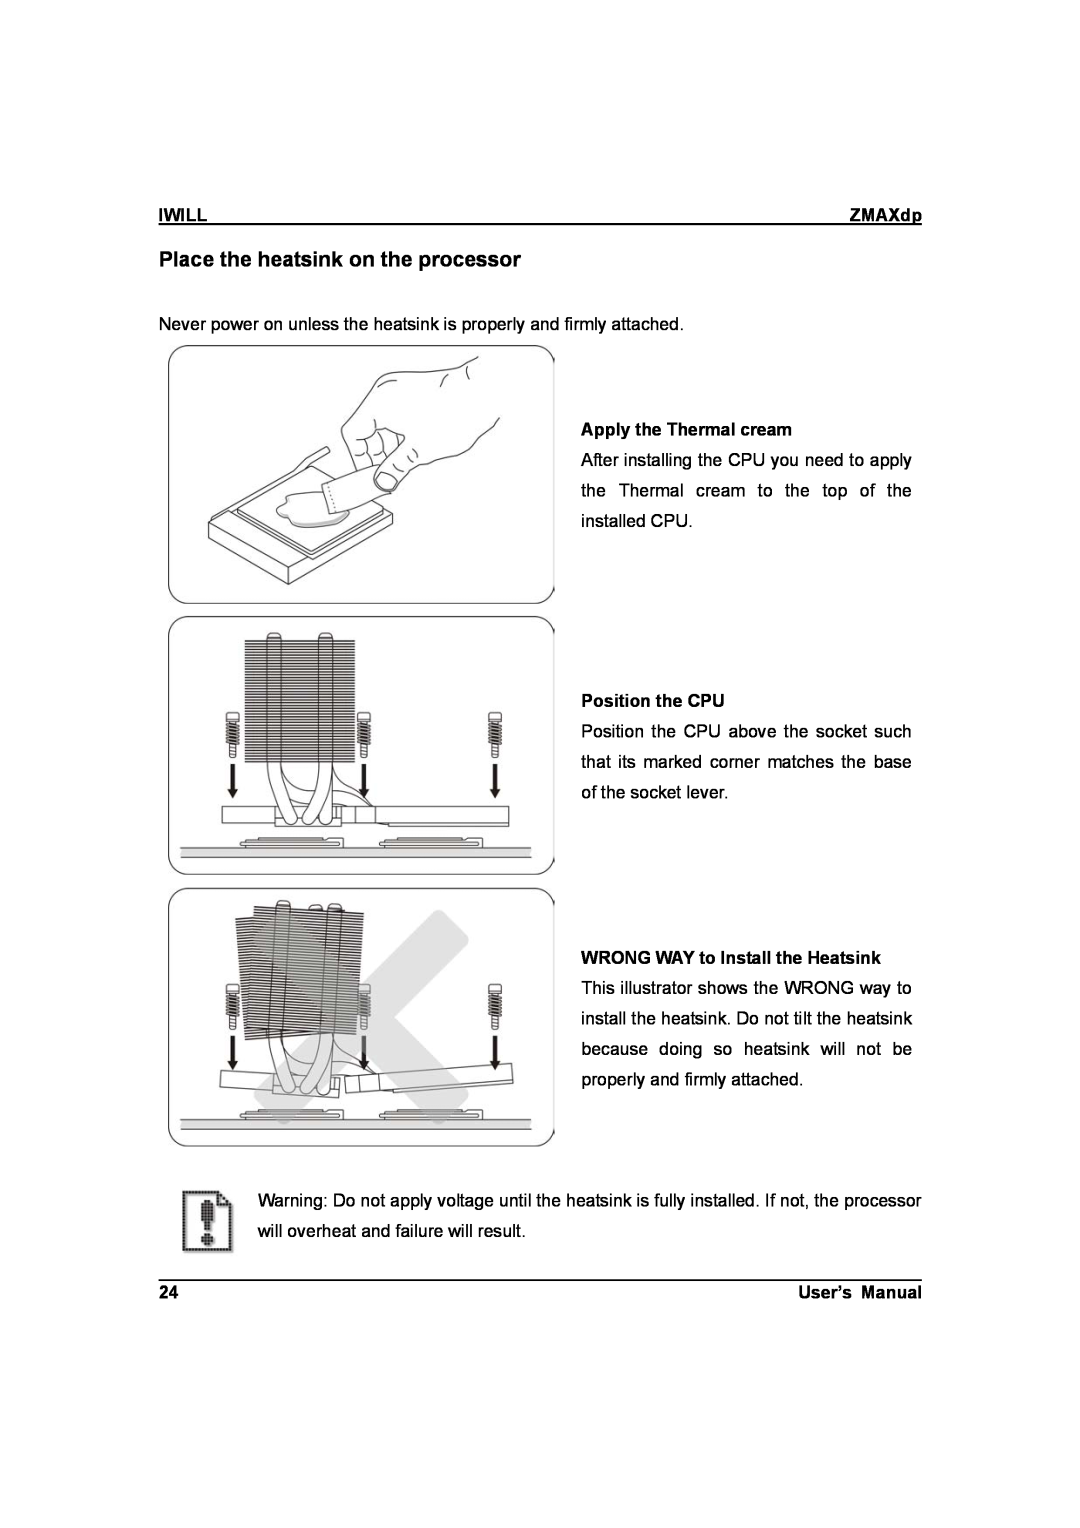 IBM ZMAXdp user manual Place the heatsink on the processor, Iwill, Apply the Thermal cream, Position the CPU, User’s Manual 